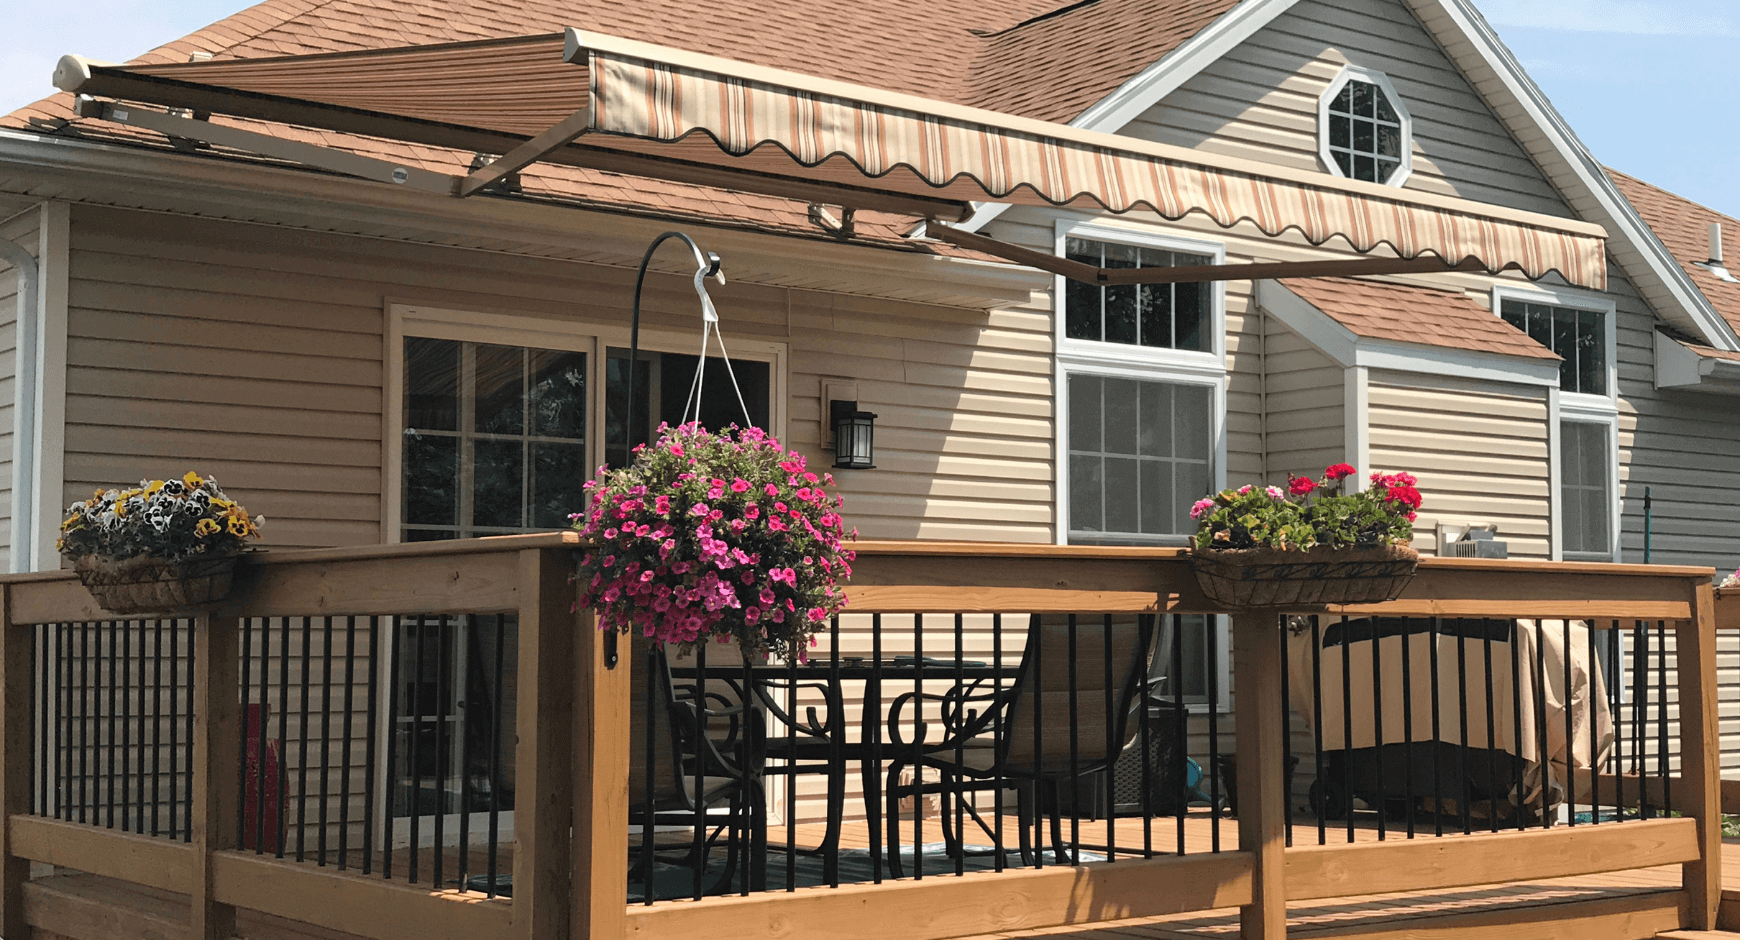 Striped Retractable Awning